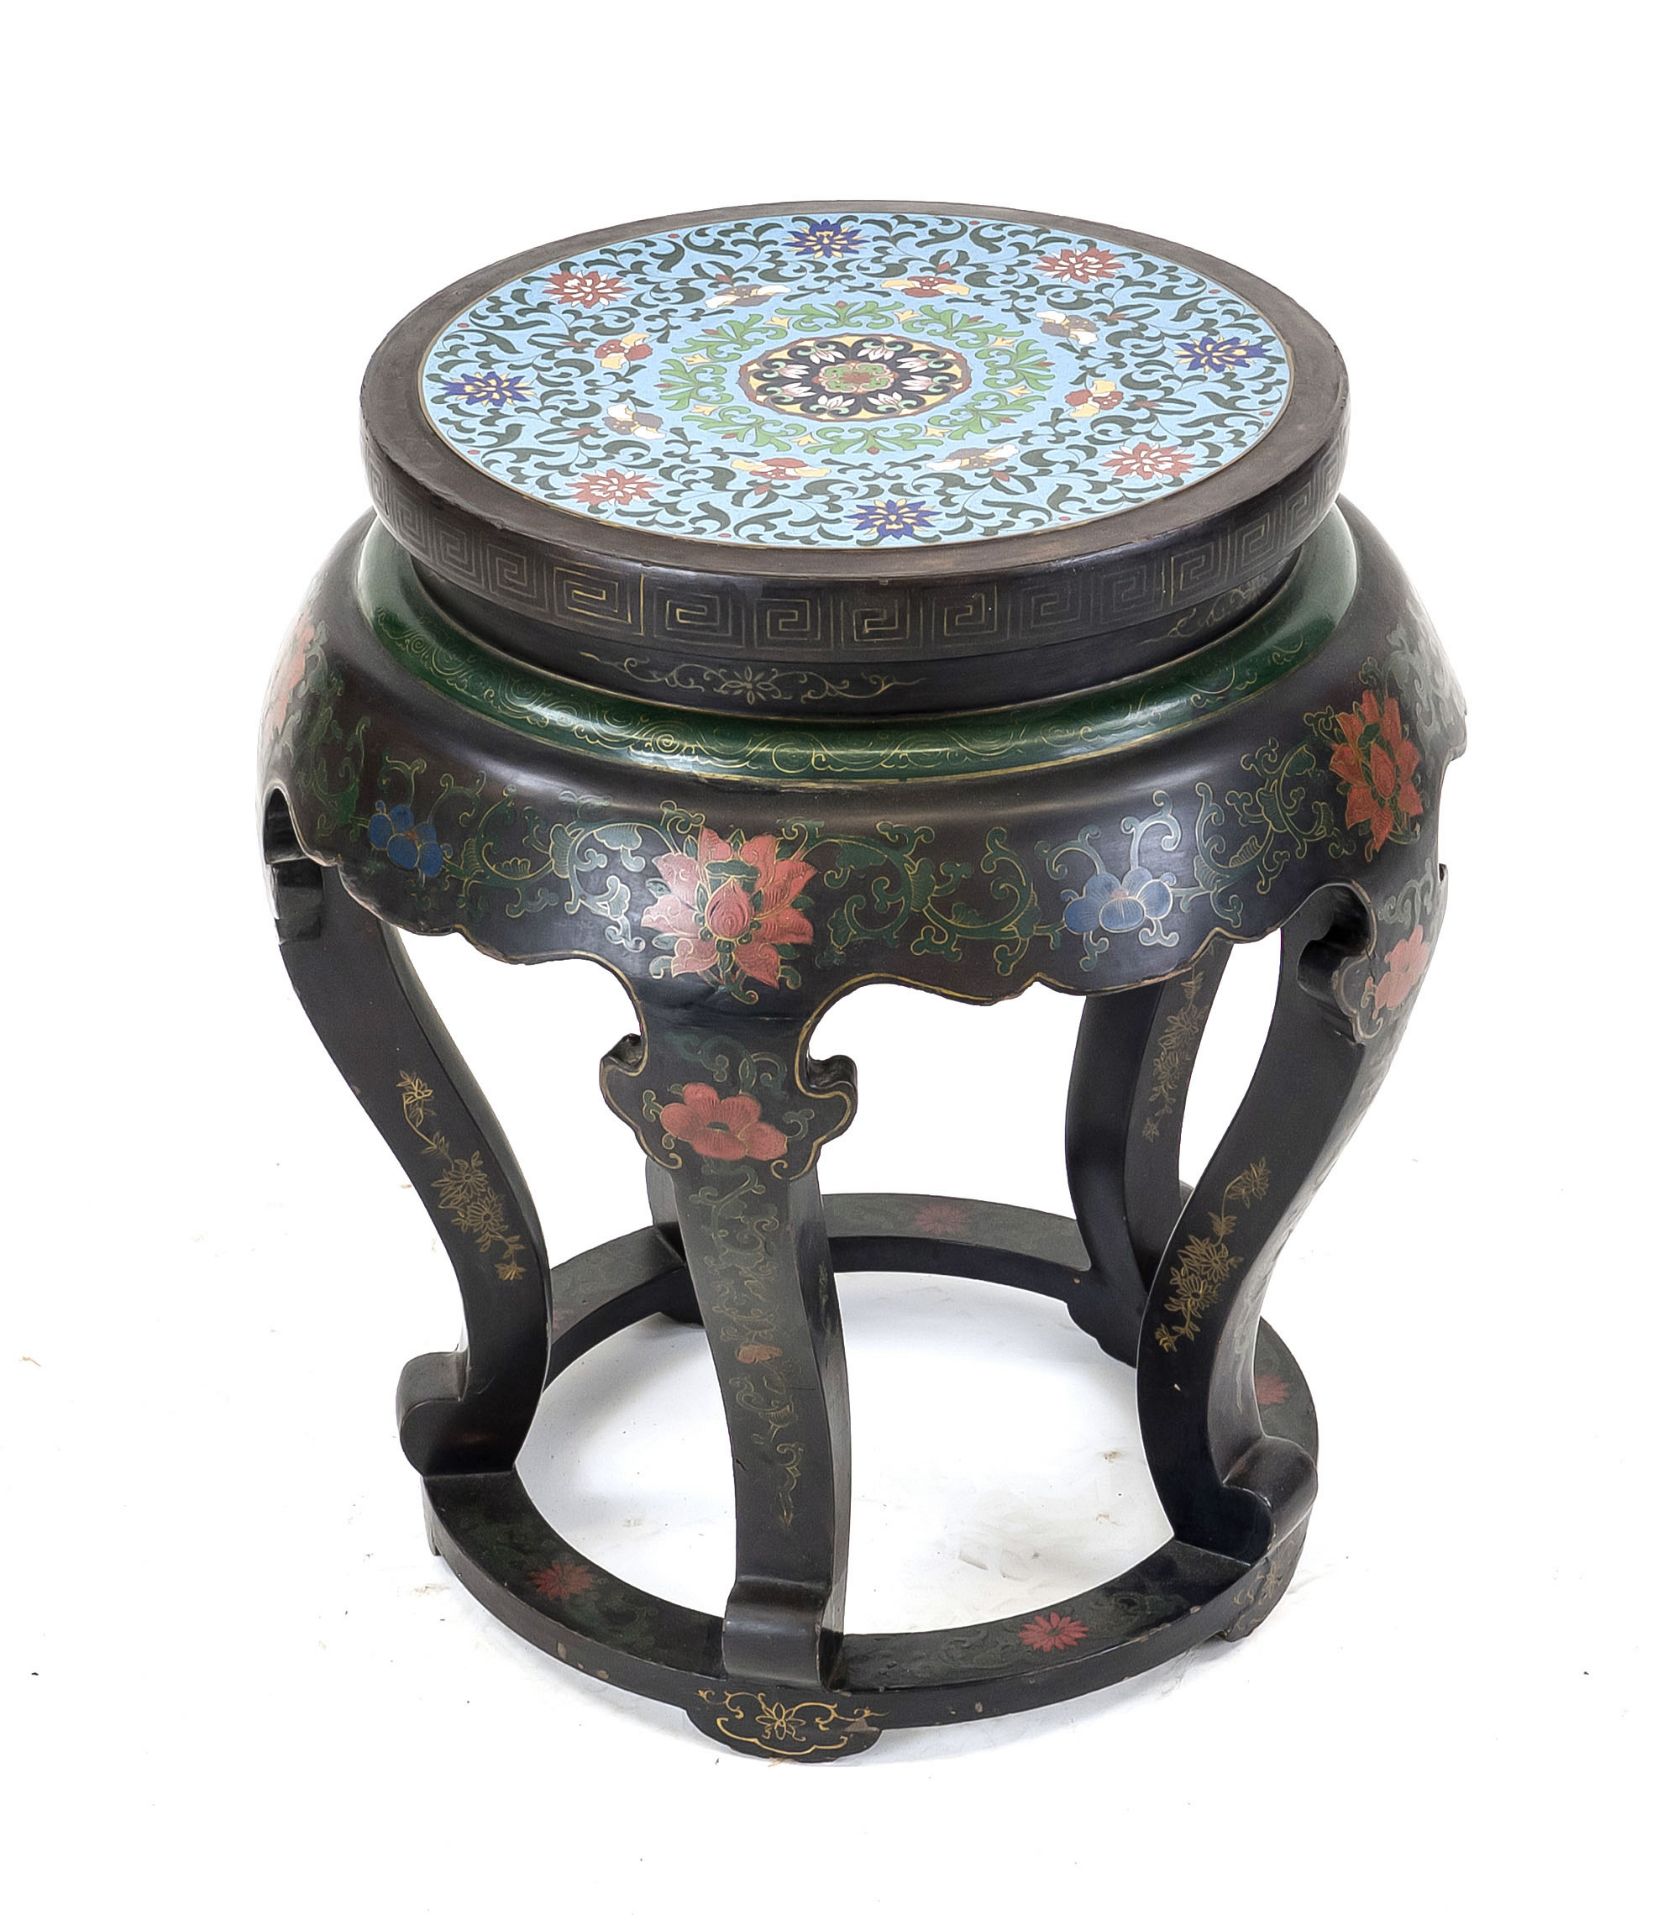 Stool with cloisonné support, China 20th century, wood with black lacquer and painting, cloisonné